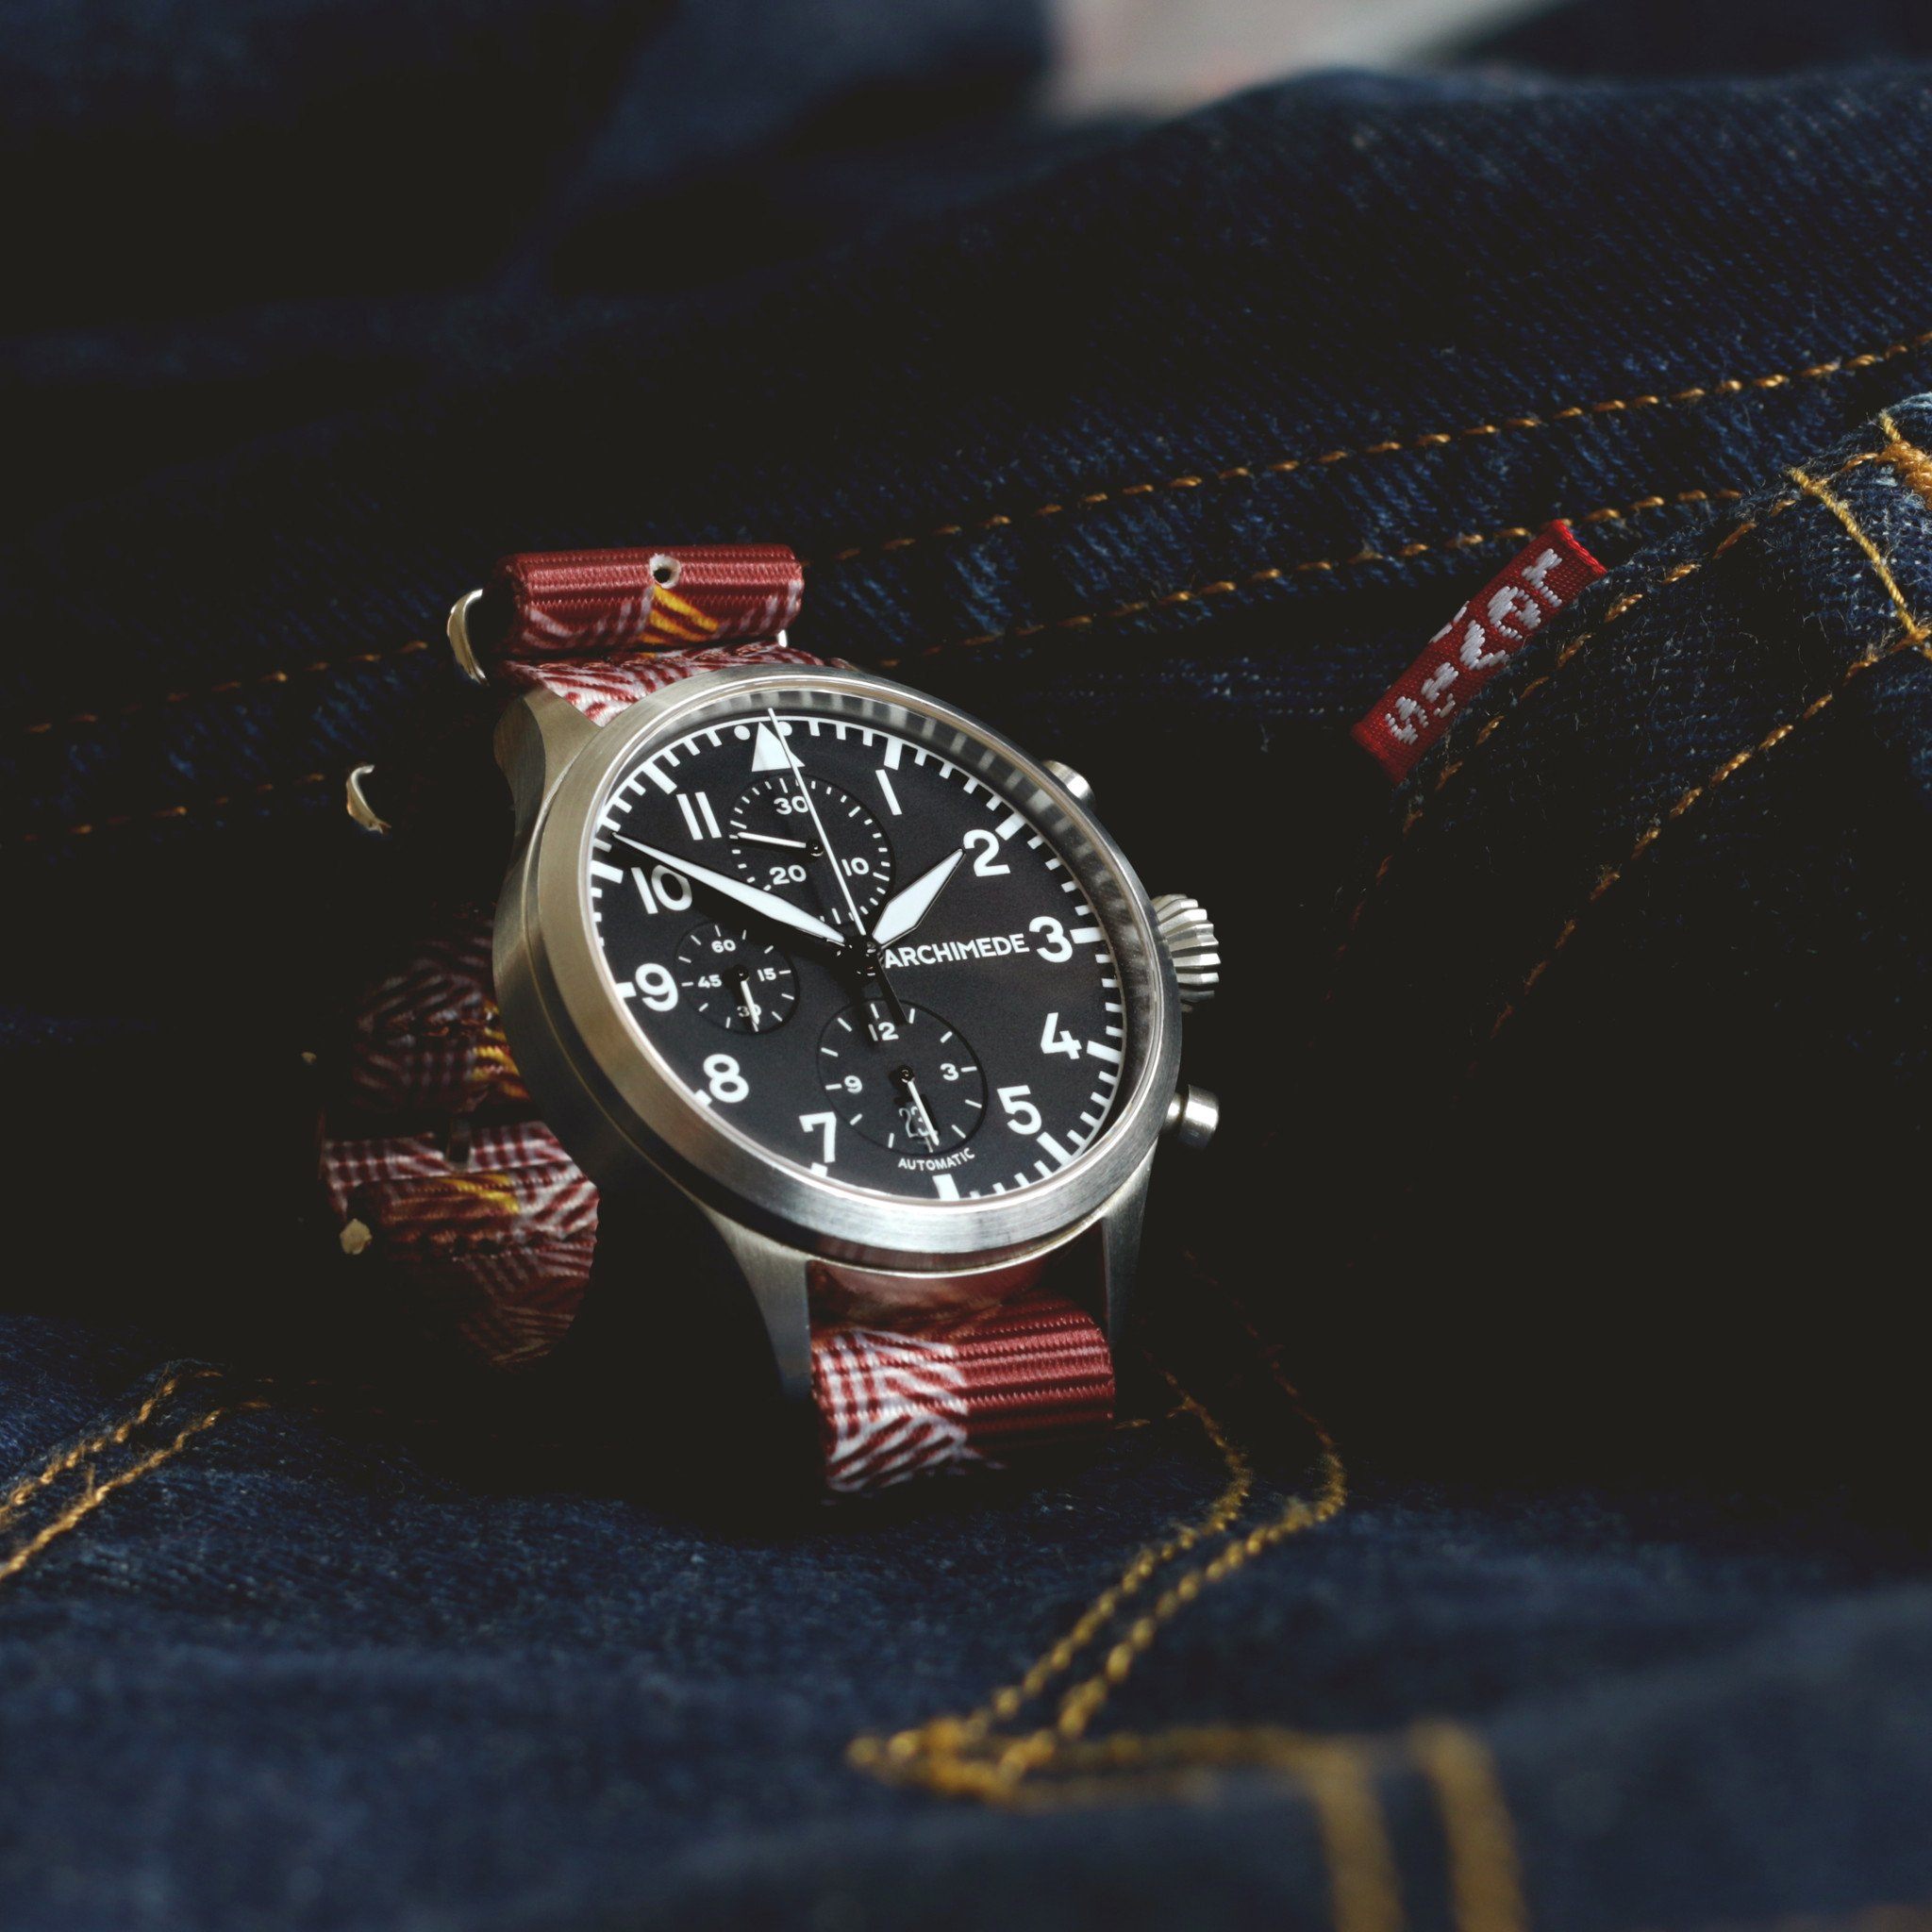 Archimede watch with Escher Crate strap